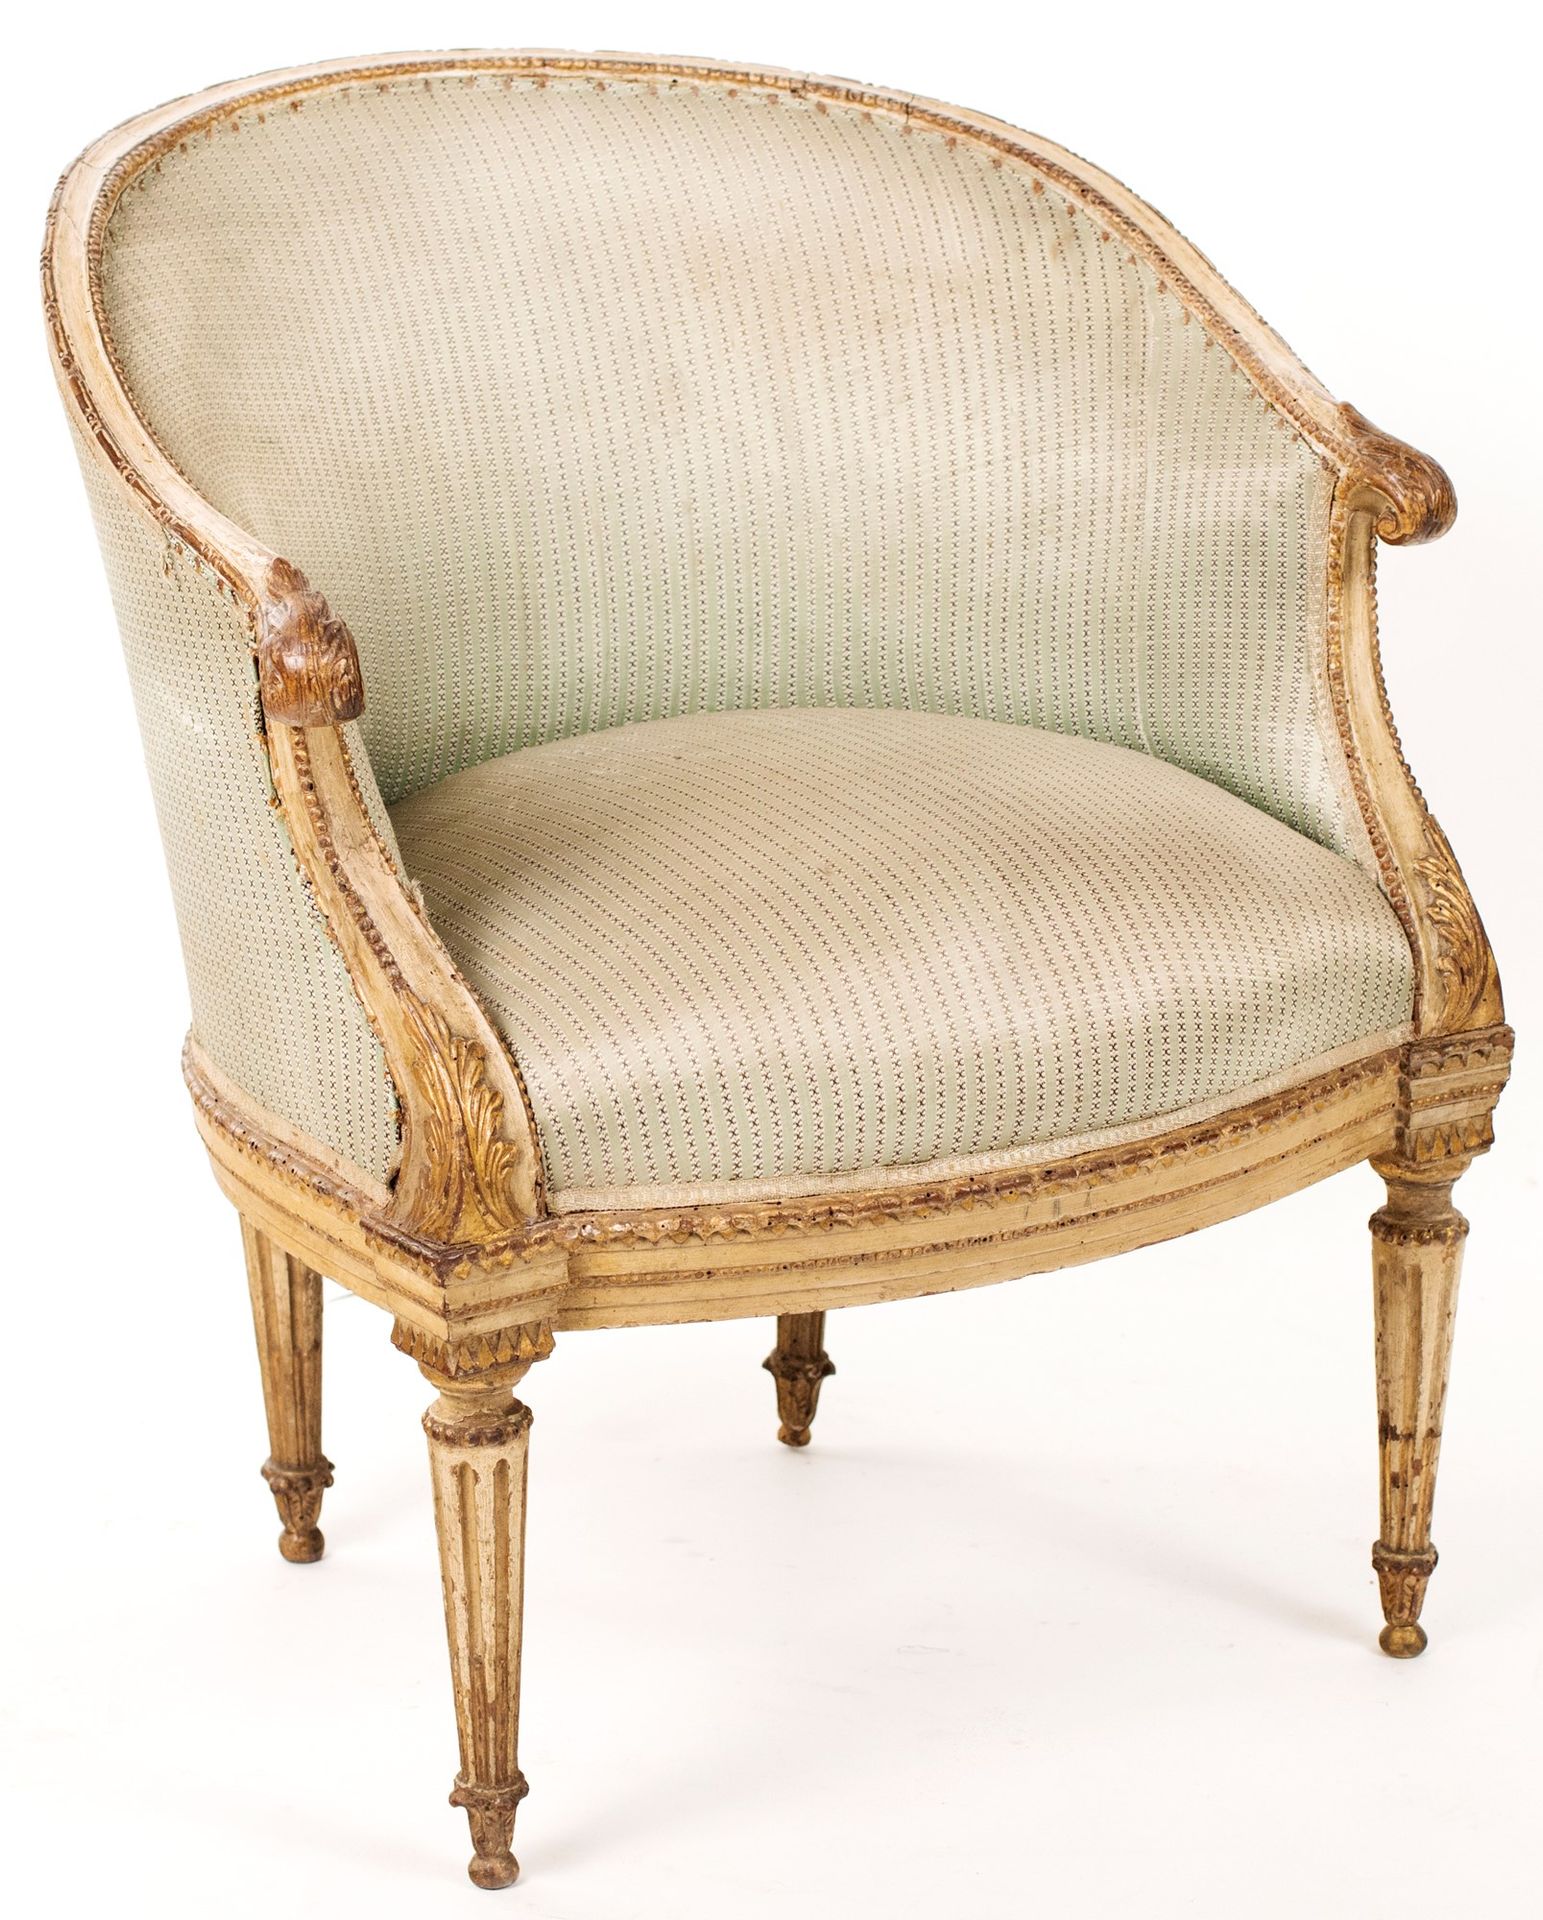 Cockpit armchair in lacquered and gilded wood, 19th century mit Profilen, die vo&hellip;